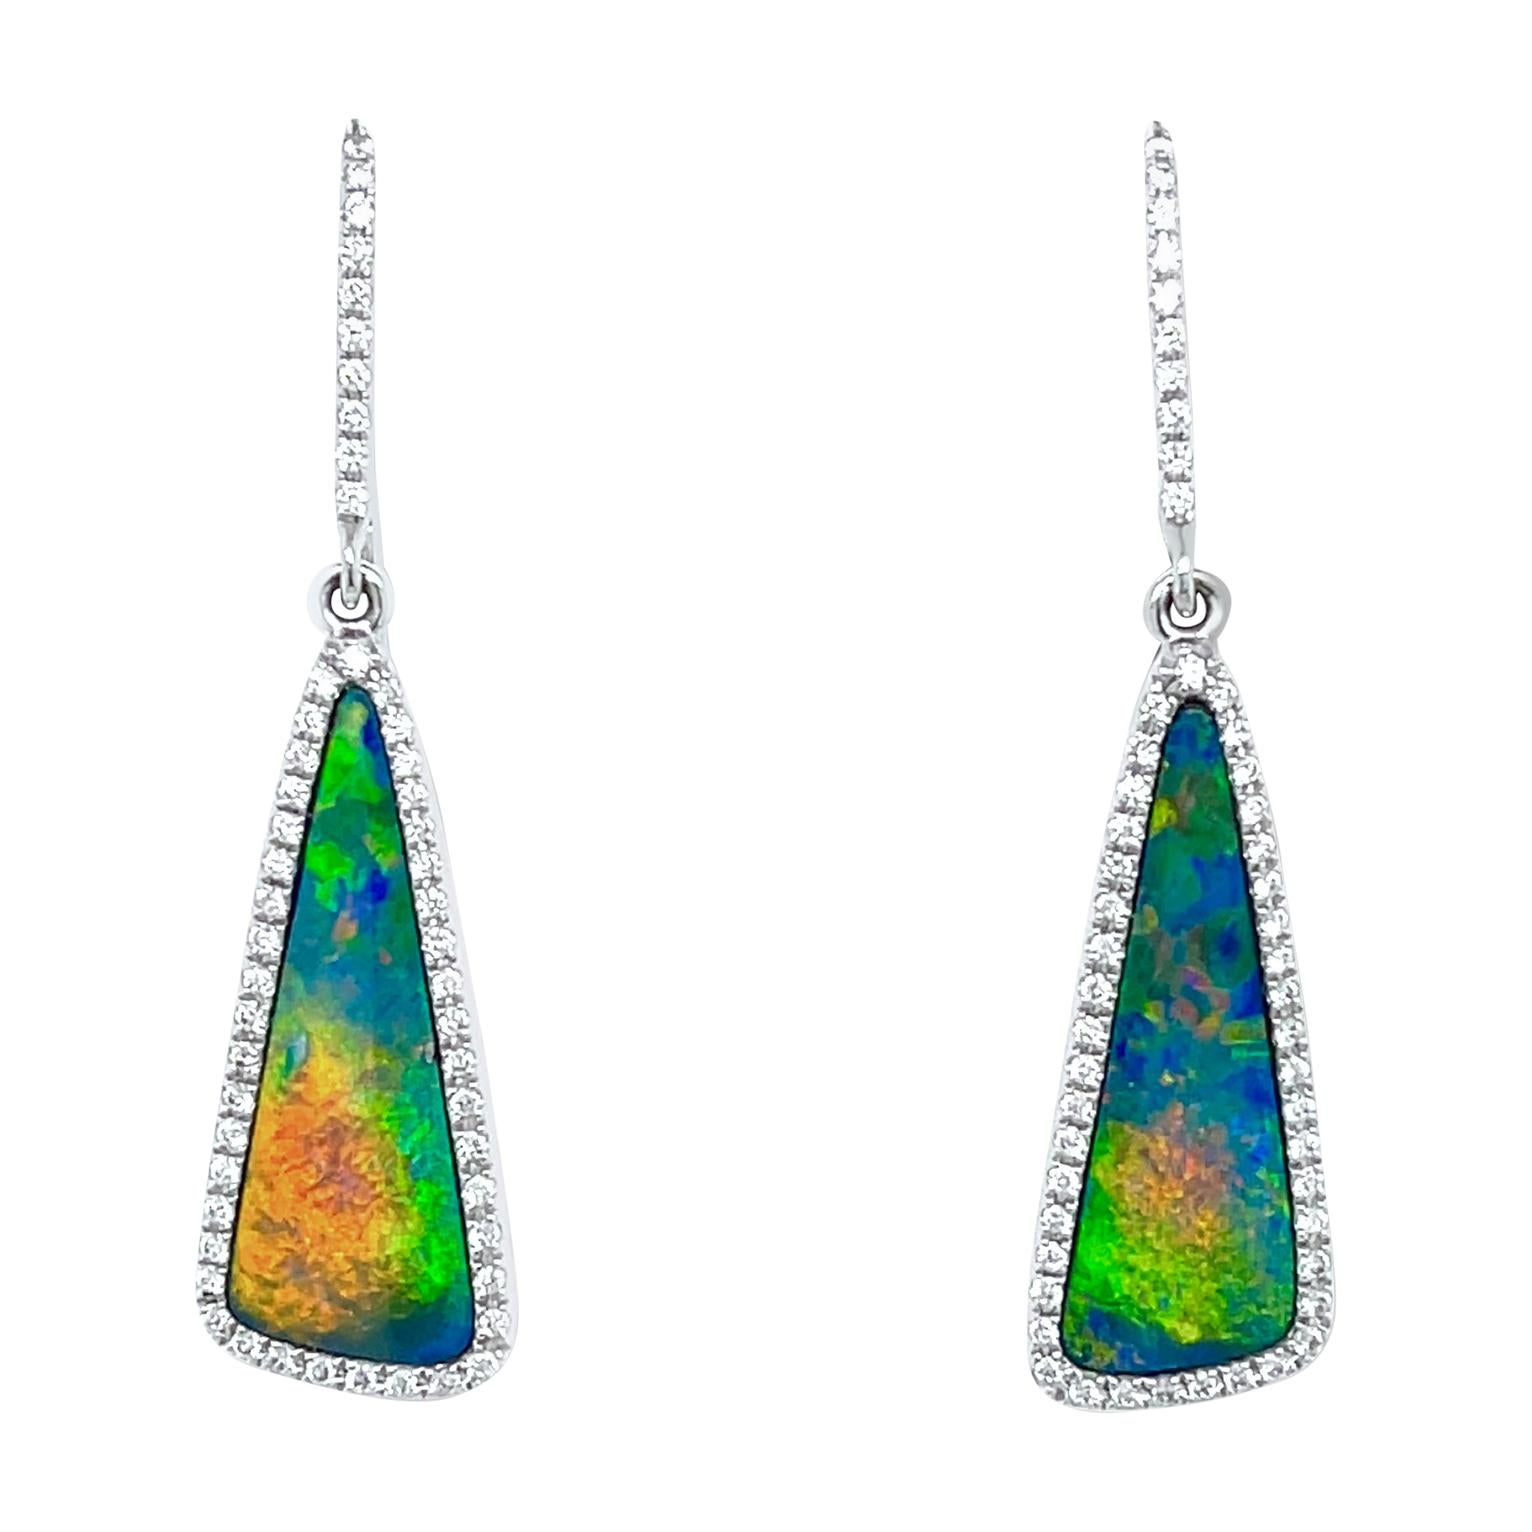 Natural Australian 5.26ct Opals Doublet and Diamond Earrings in 18K White Gold